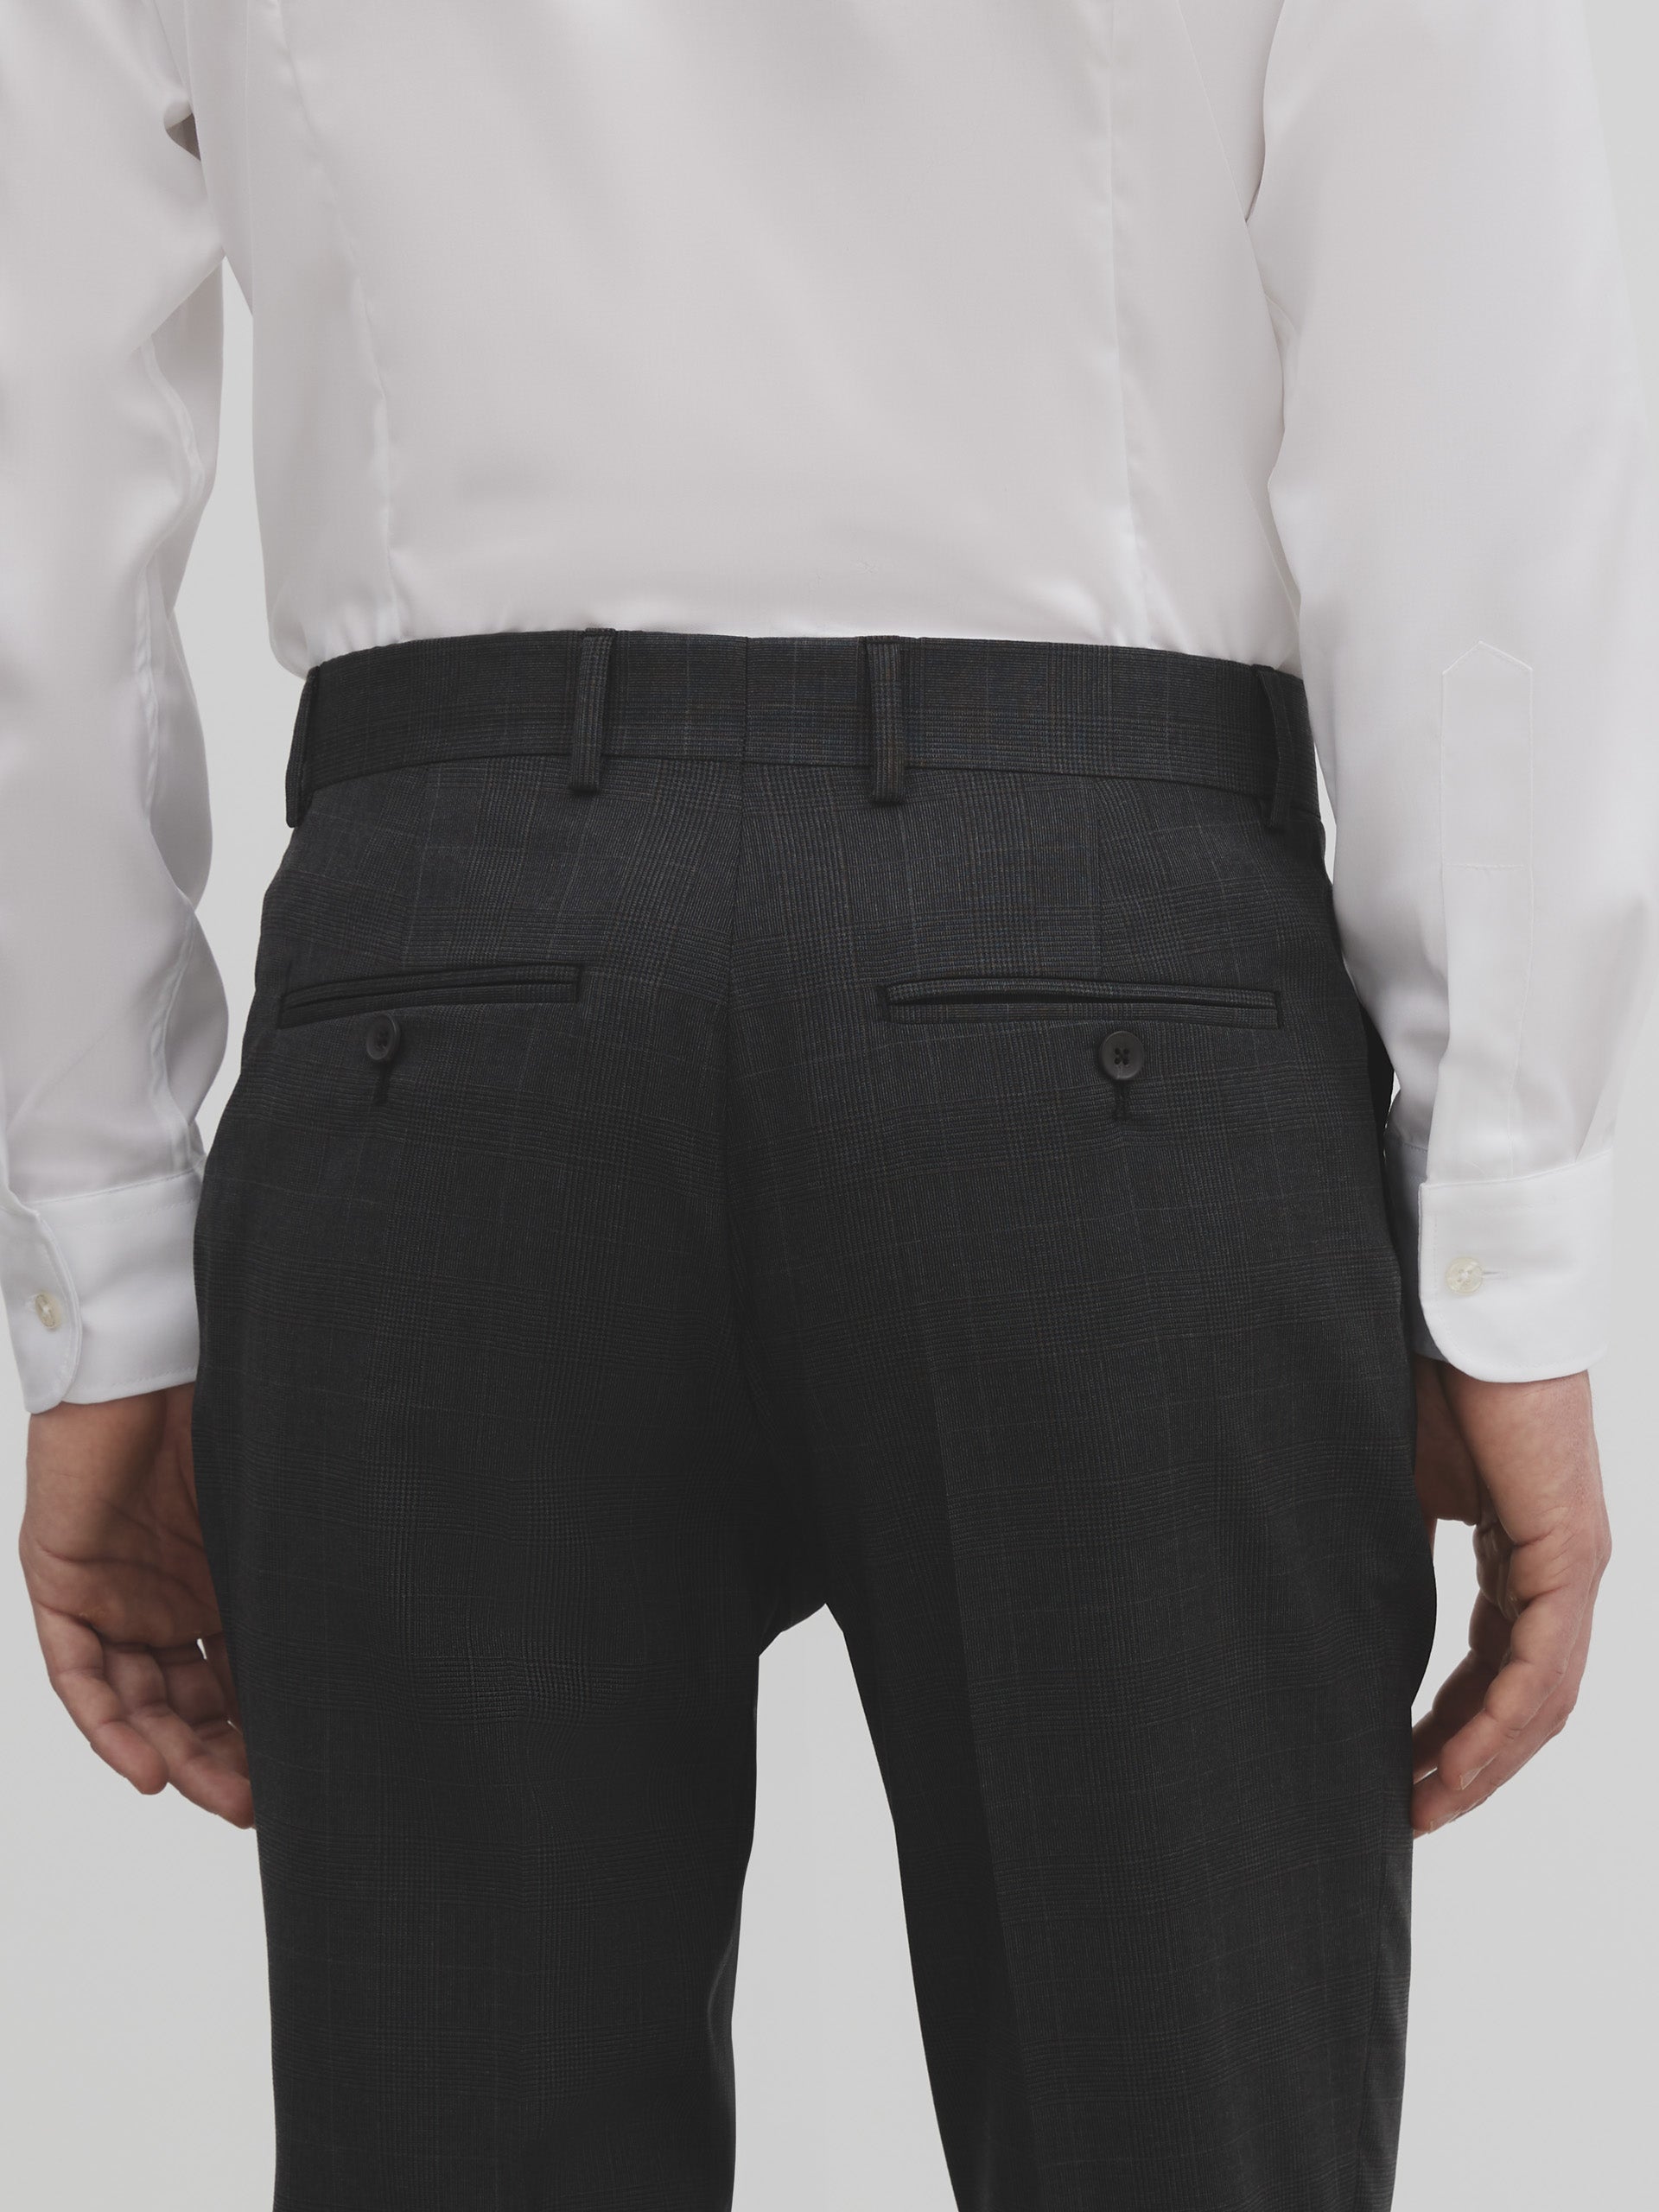 Gray prince of wales suit pants